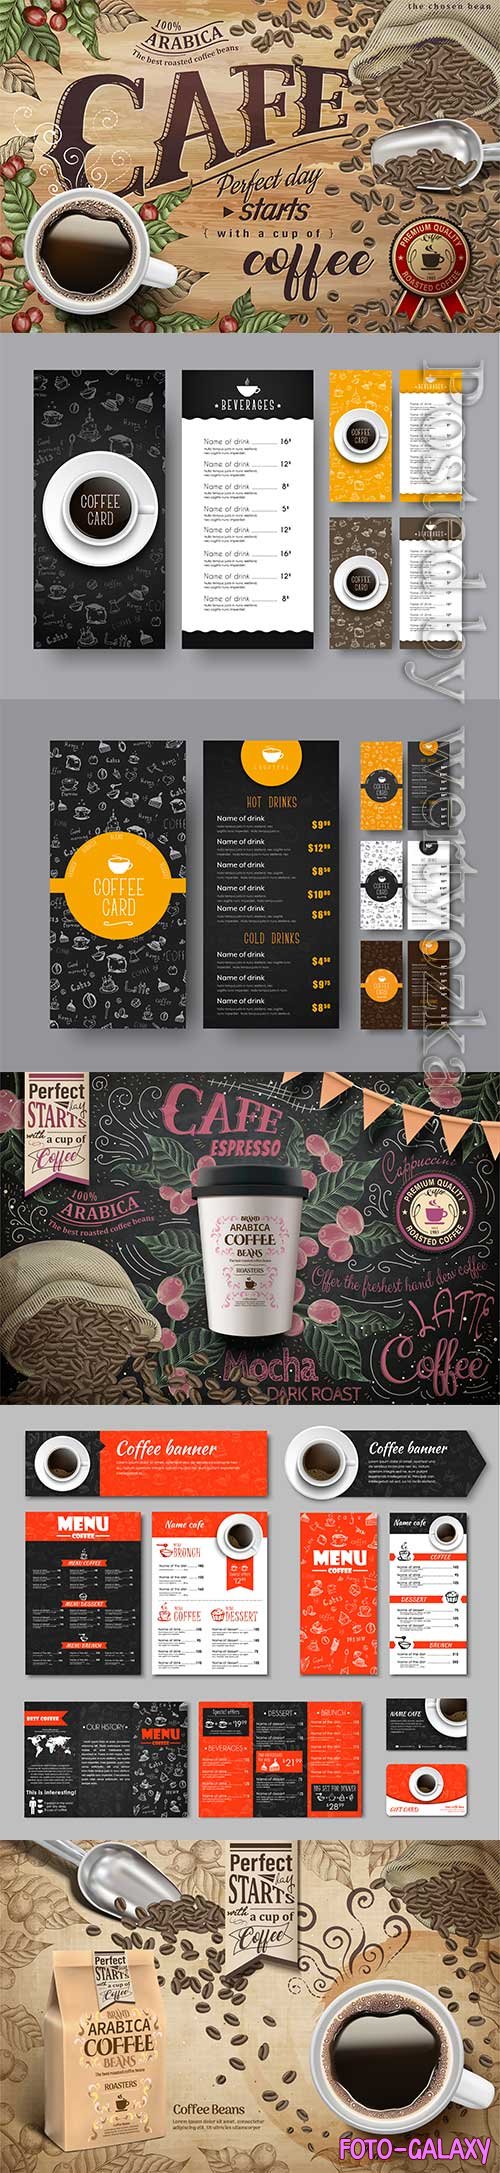 Template of the coffee menu for a cafe or restaurant